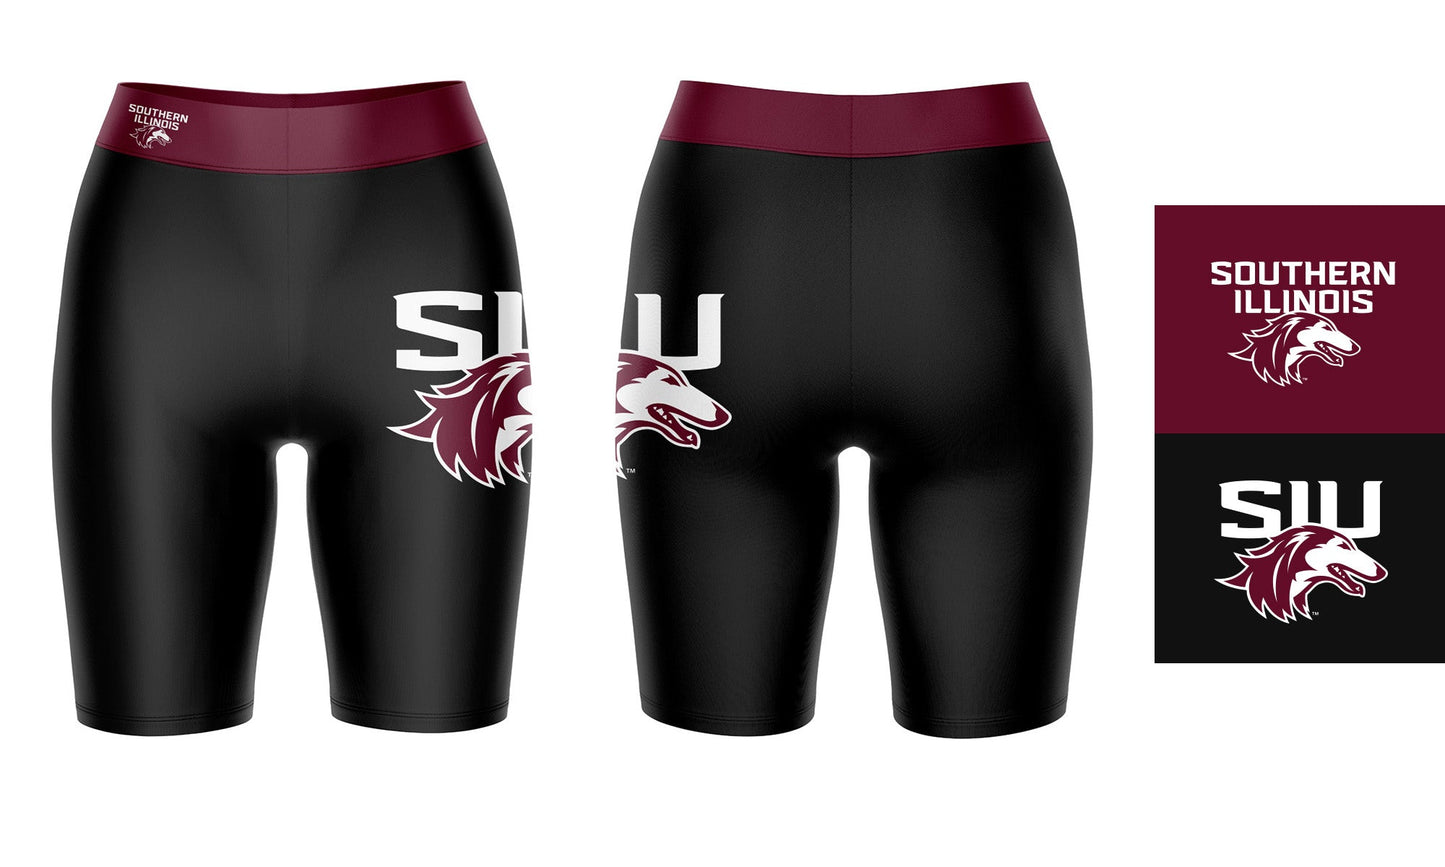 SIU Salukis Vive La Fete Game Day Logo on Thigh and Waistband Black and Maroon Women Bike Short 9 Inseam"